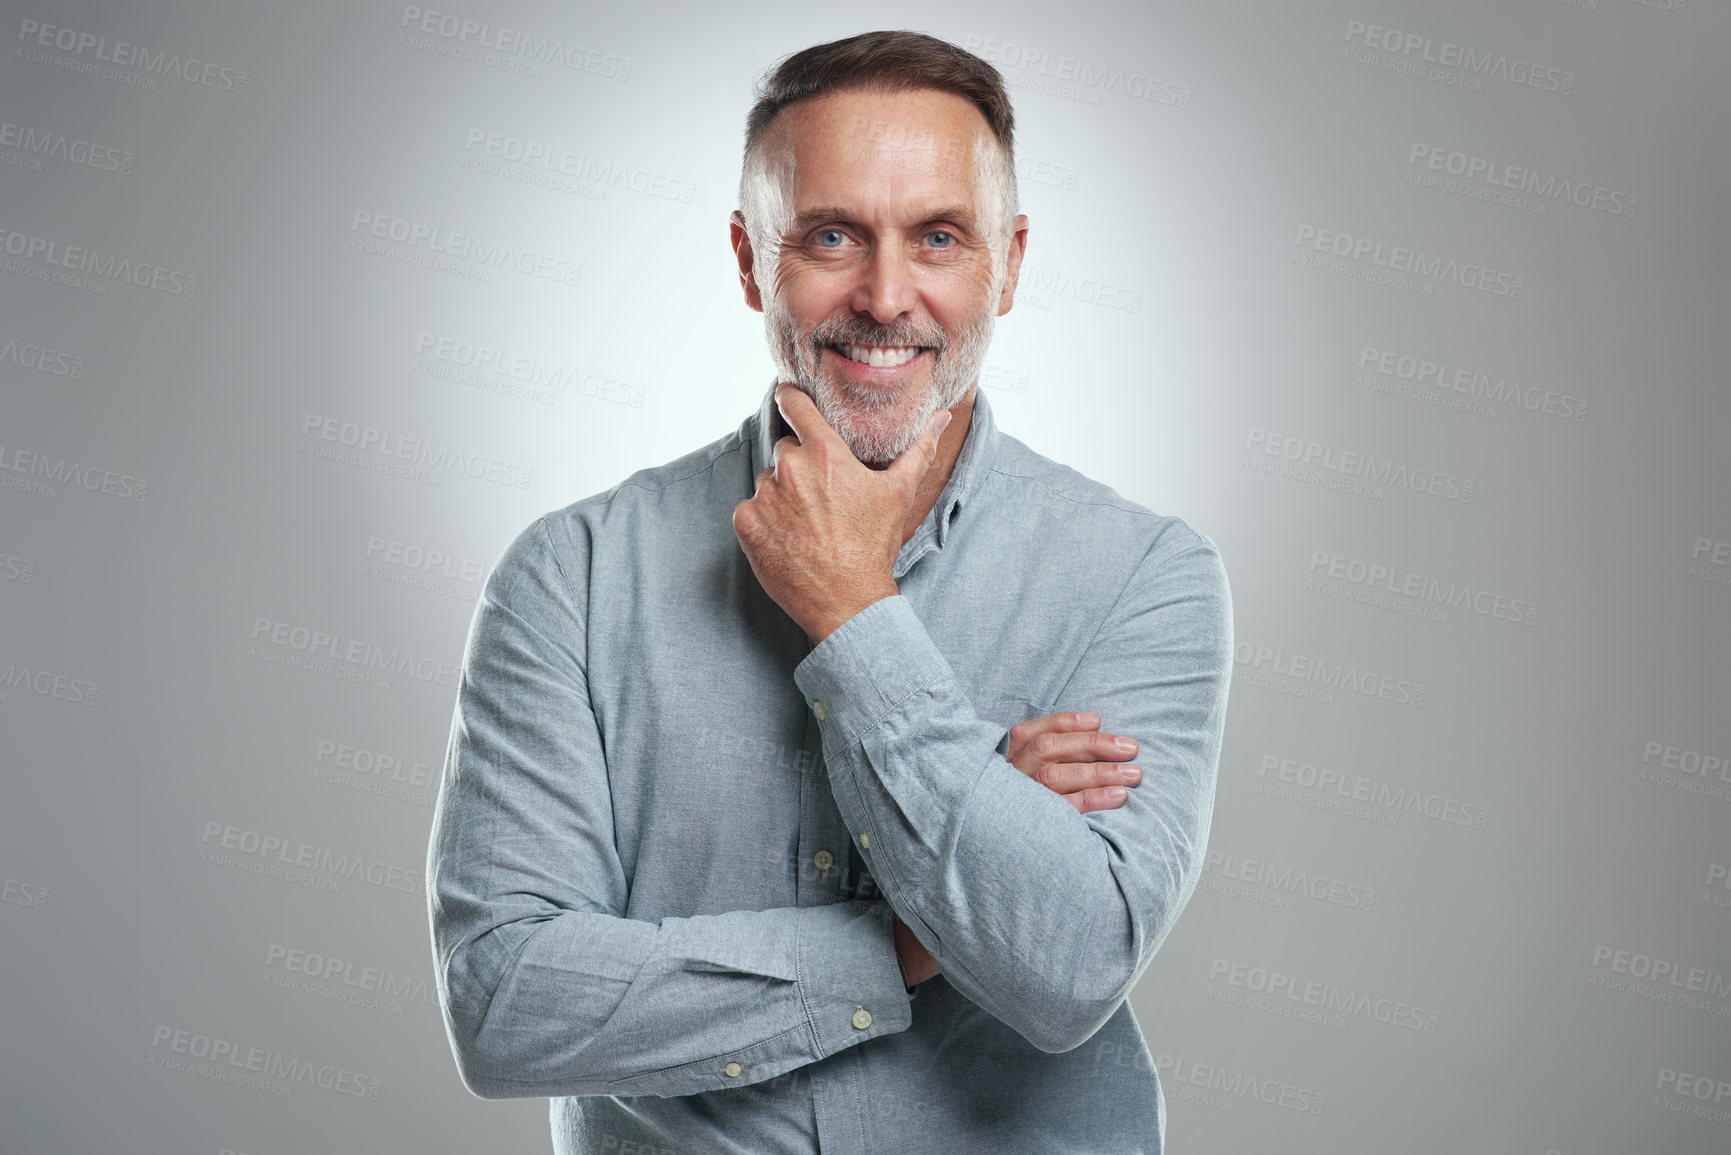 Buy stock photo Studio portrait of a mature man looking thoughtful against a grey background